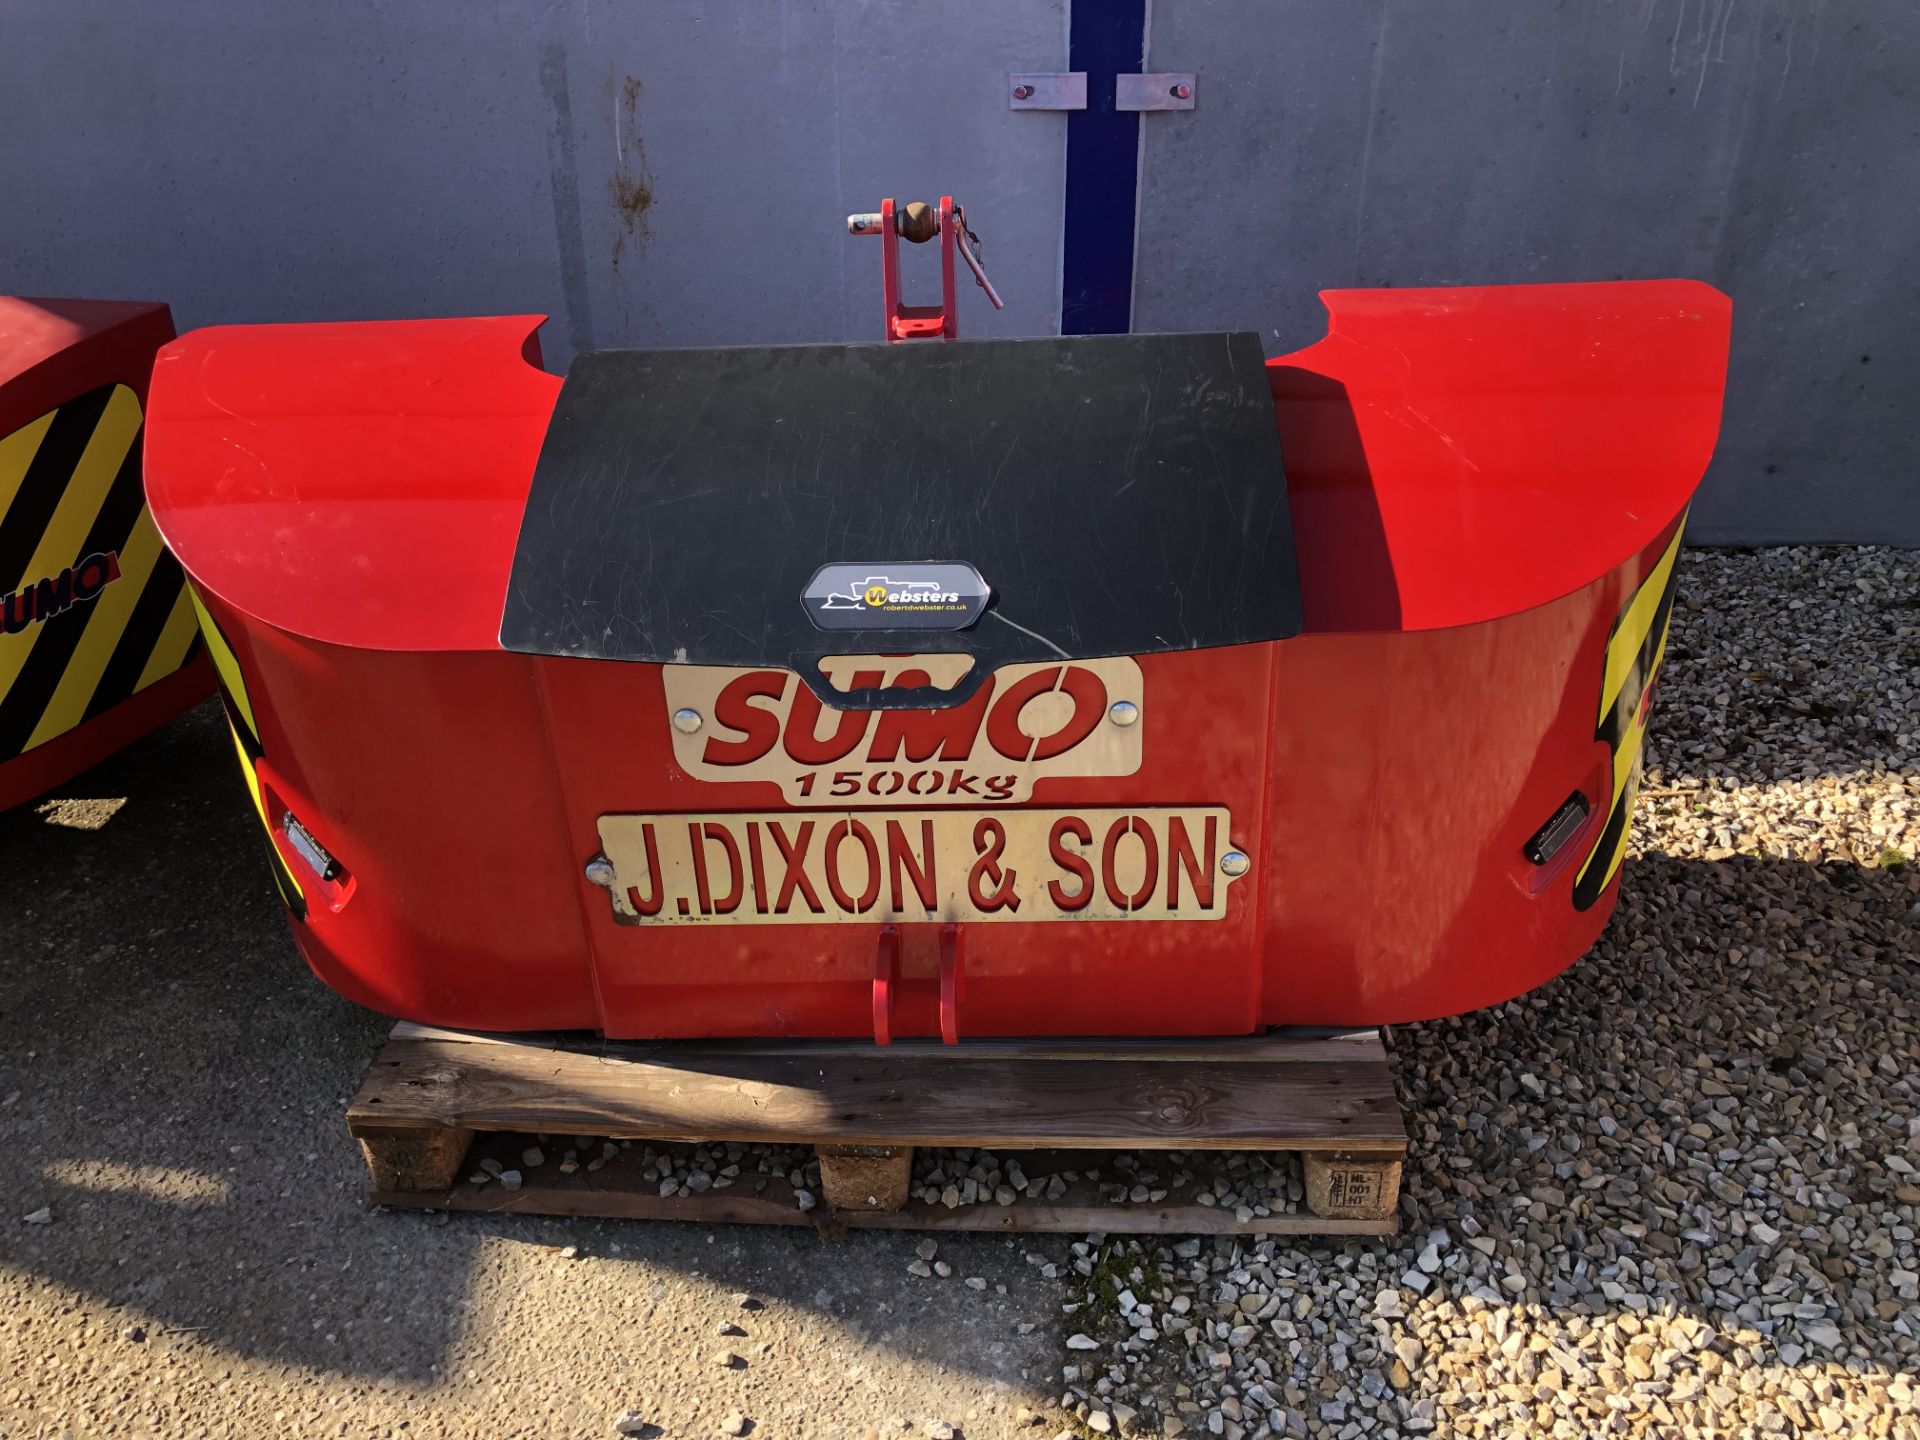 2019 Sumo 1500kgs front mounted Weight Block c/w tool box (to fit the above) - Image 3 of 4